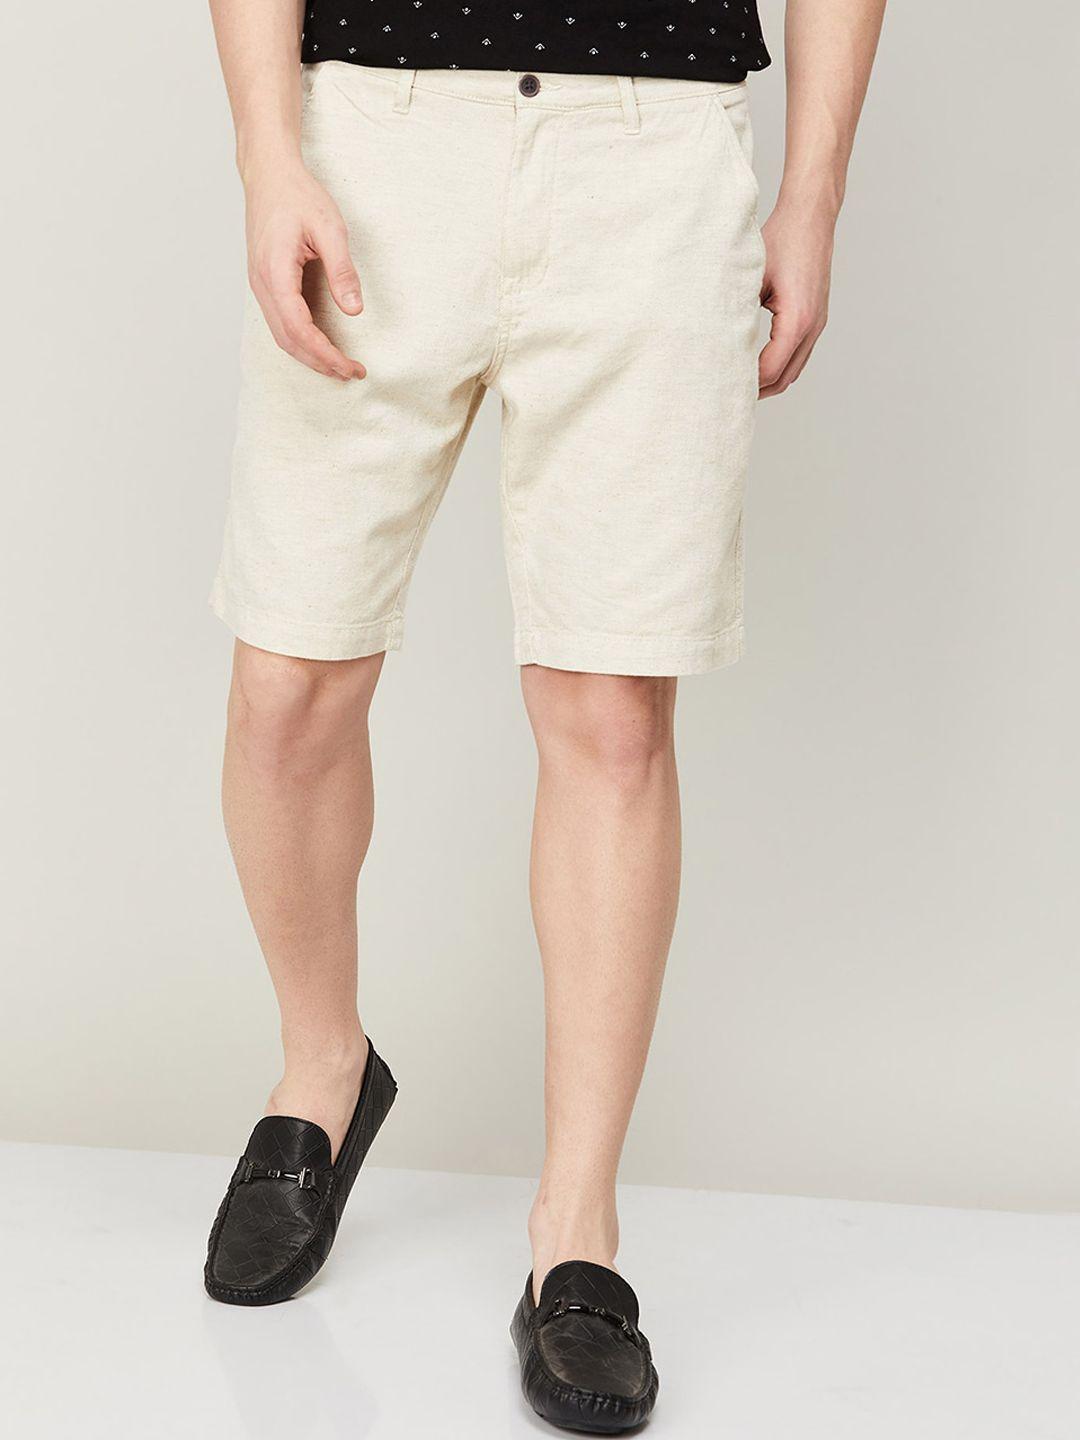 code-by-lifestyle-men-mid-rise-regular-fit-shorts